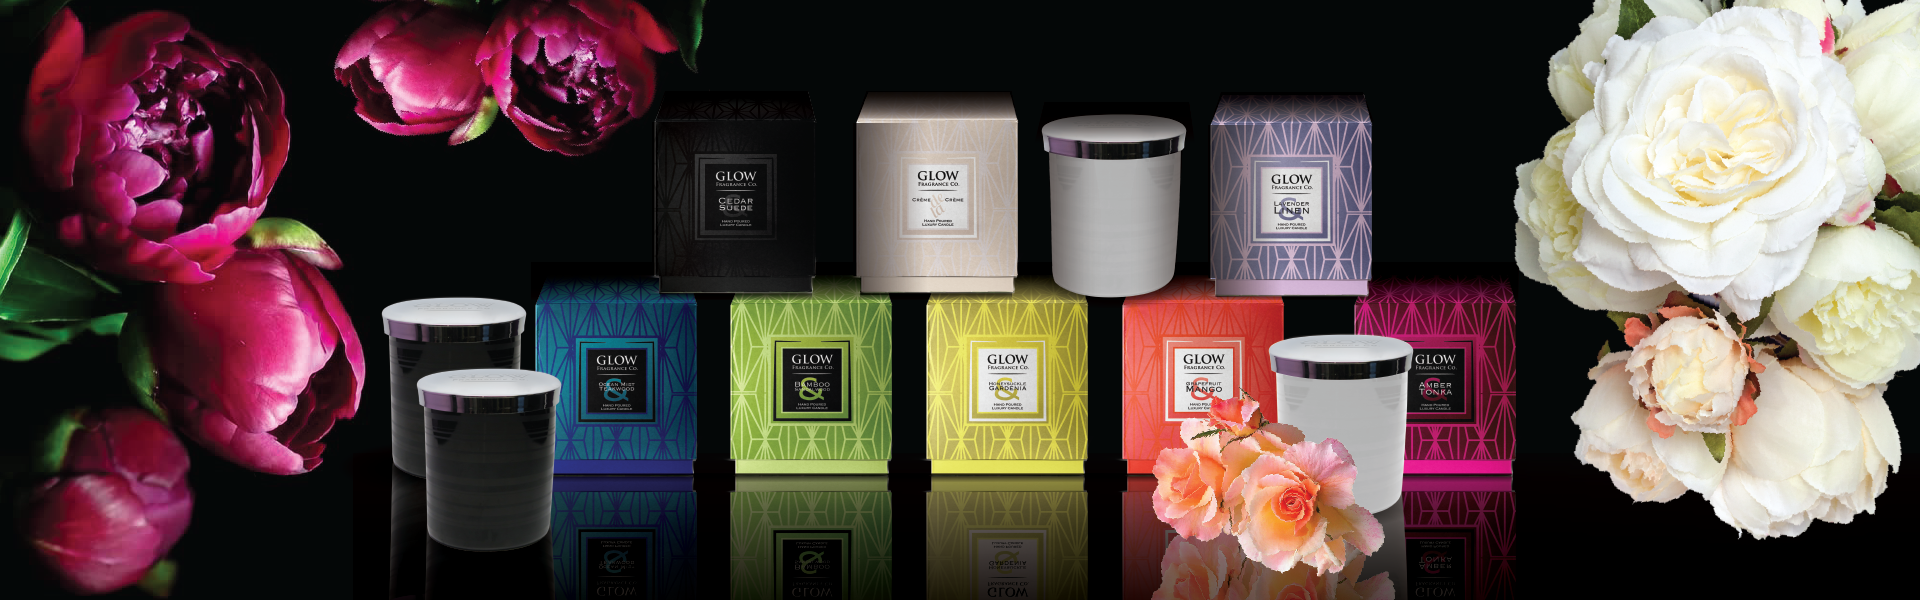 GRAND_candles_3_black_1920x600__preview.png